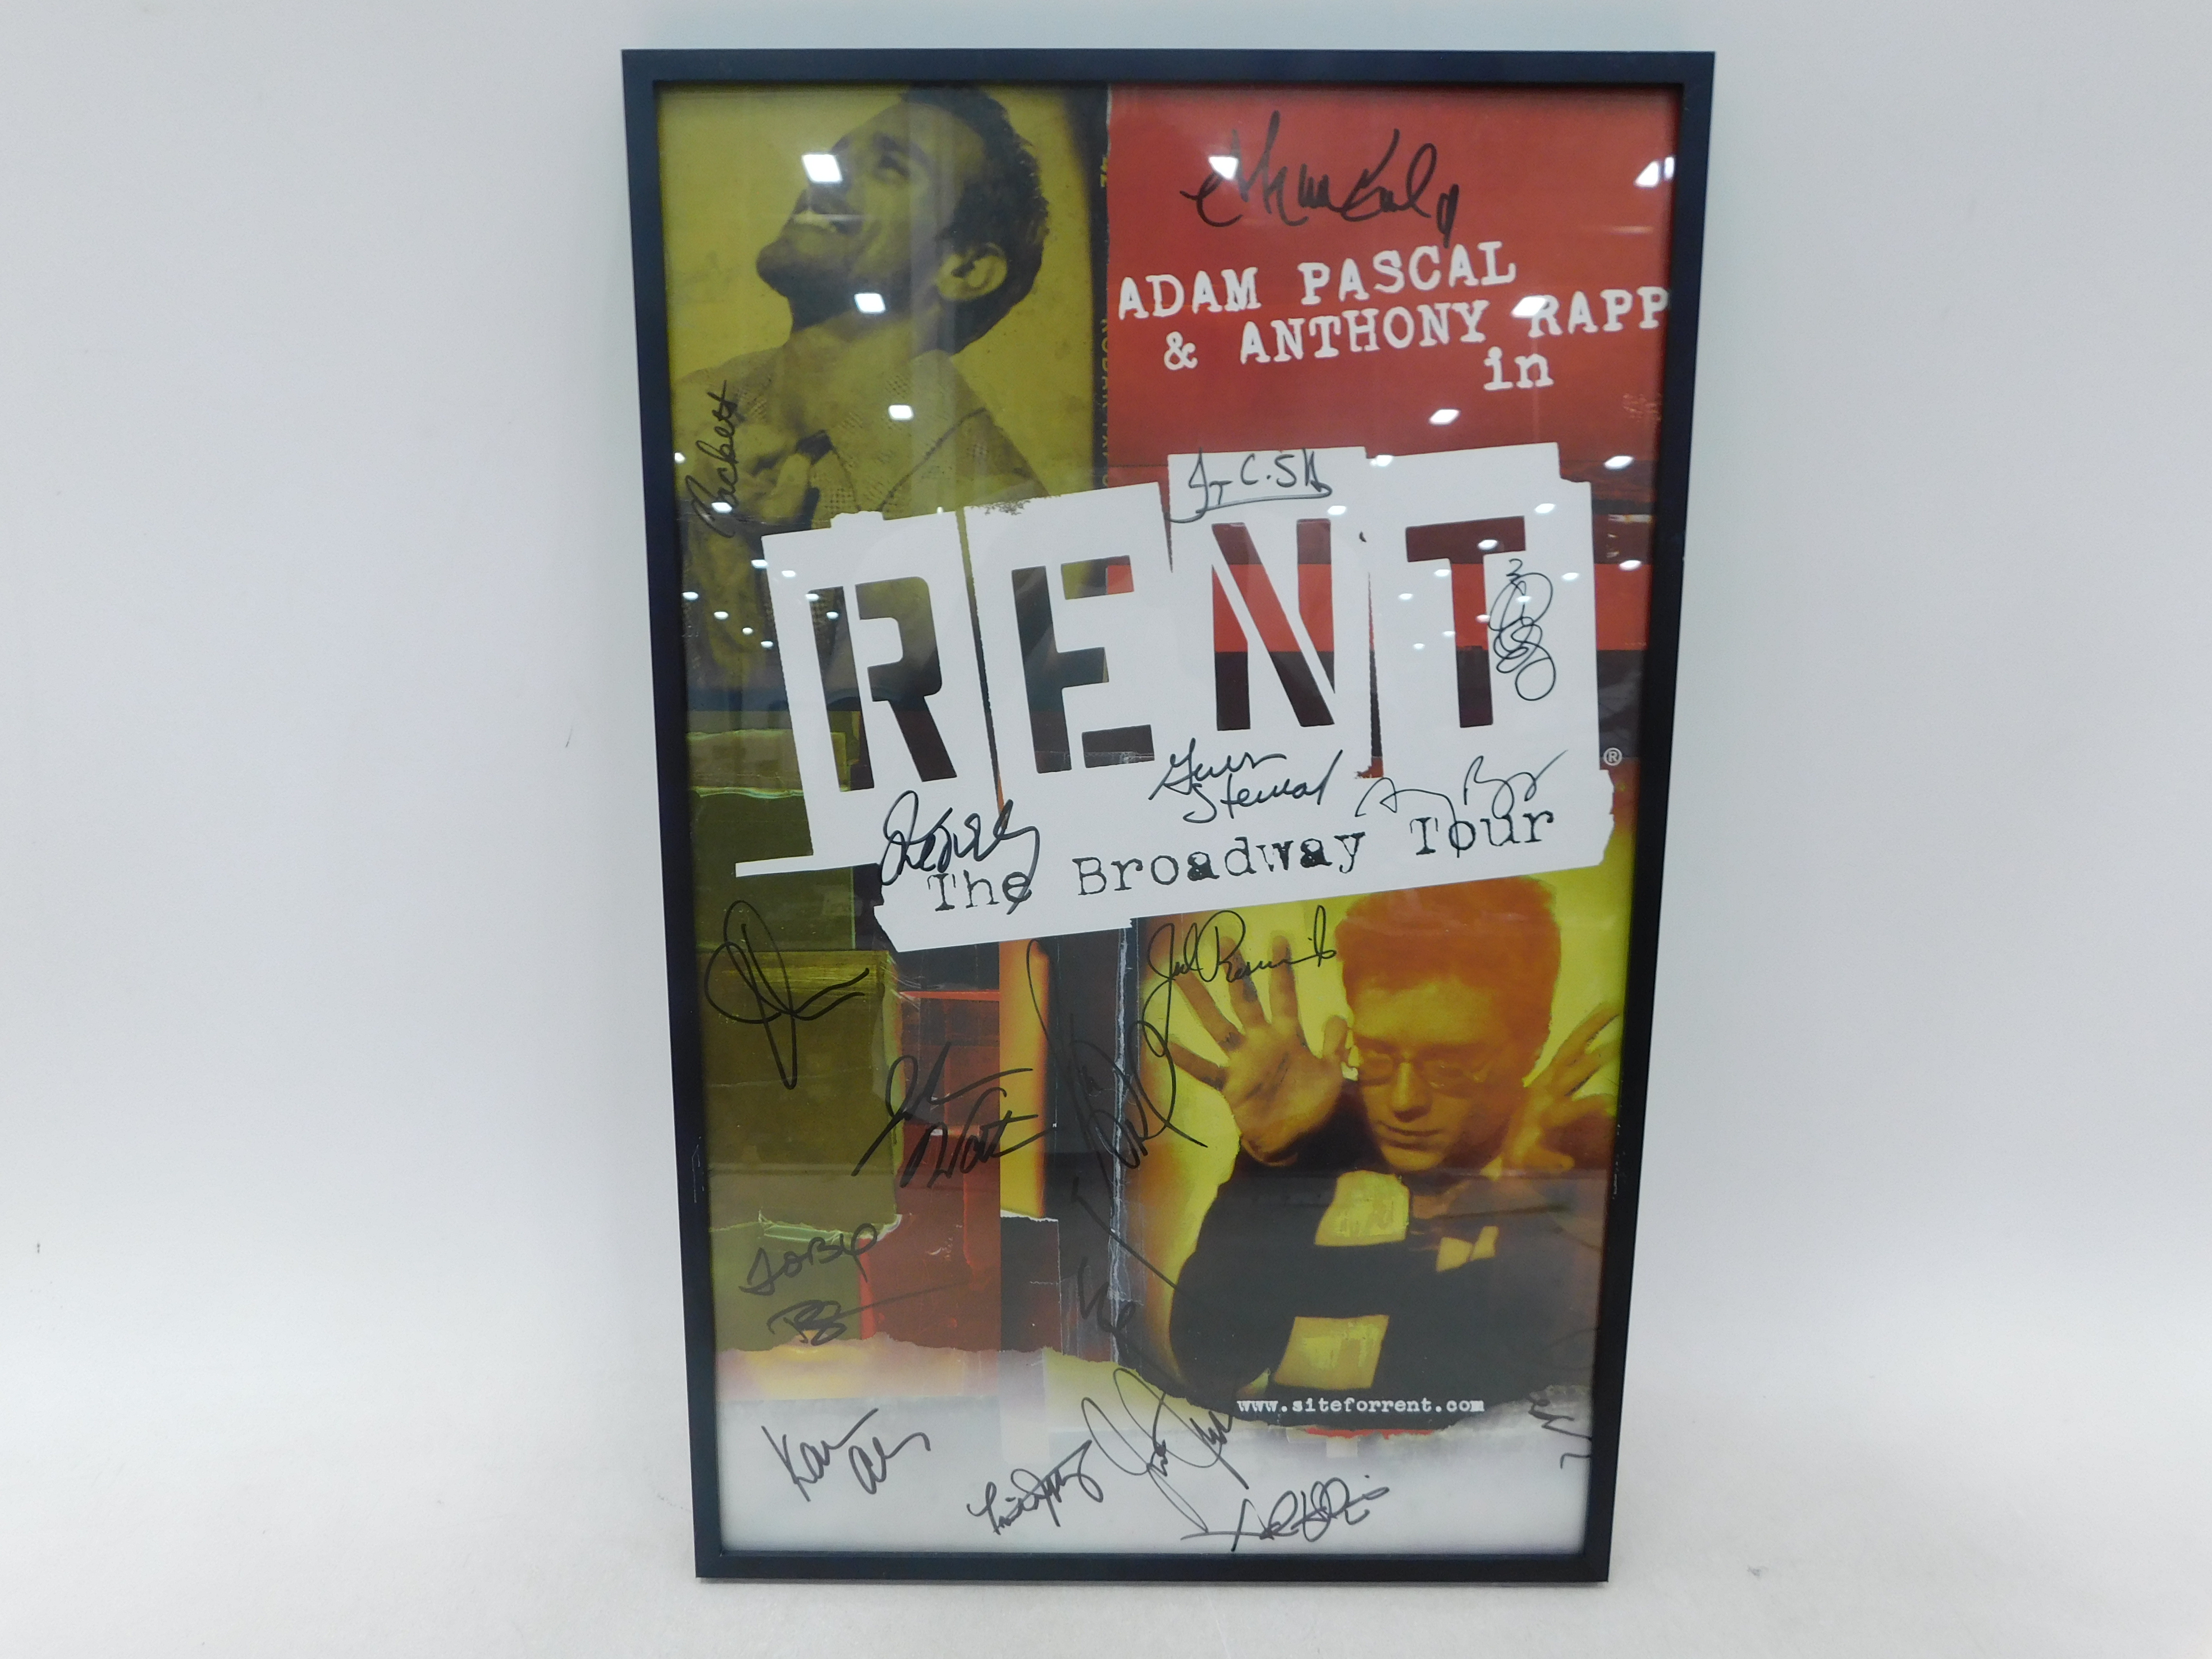 broadway posters rent